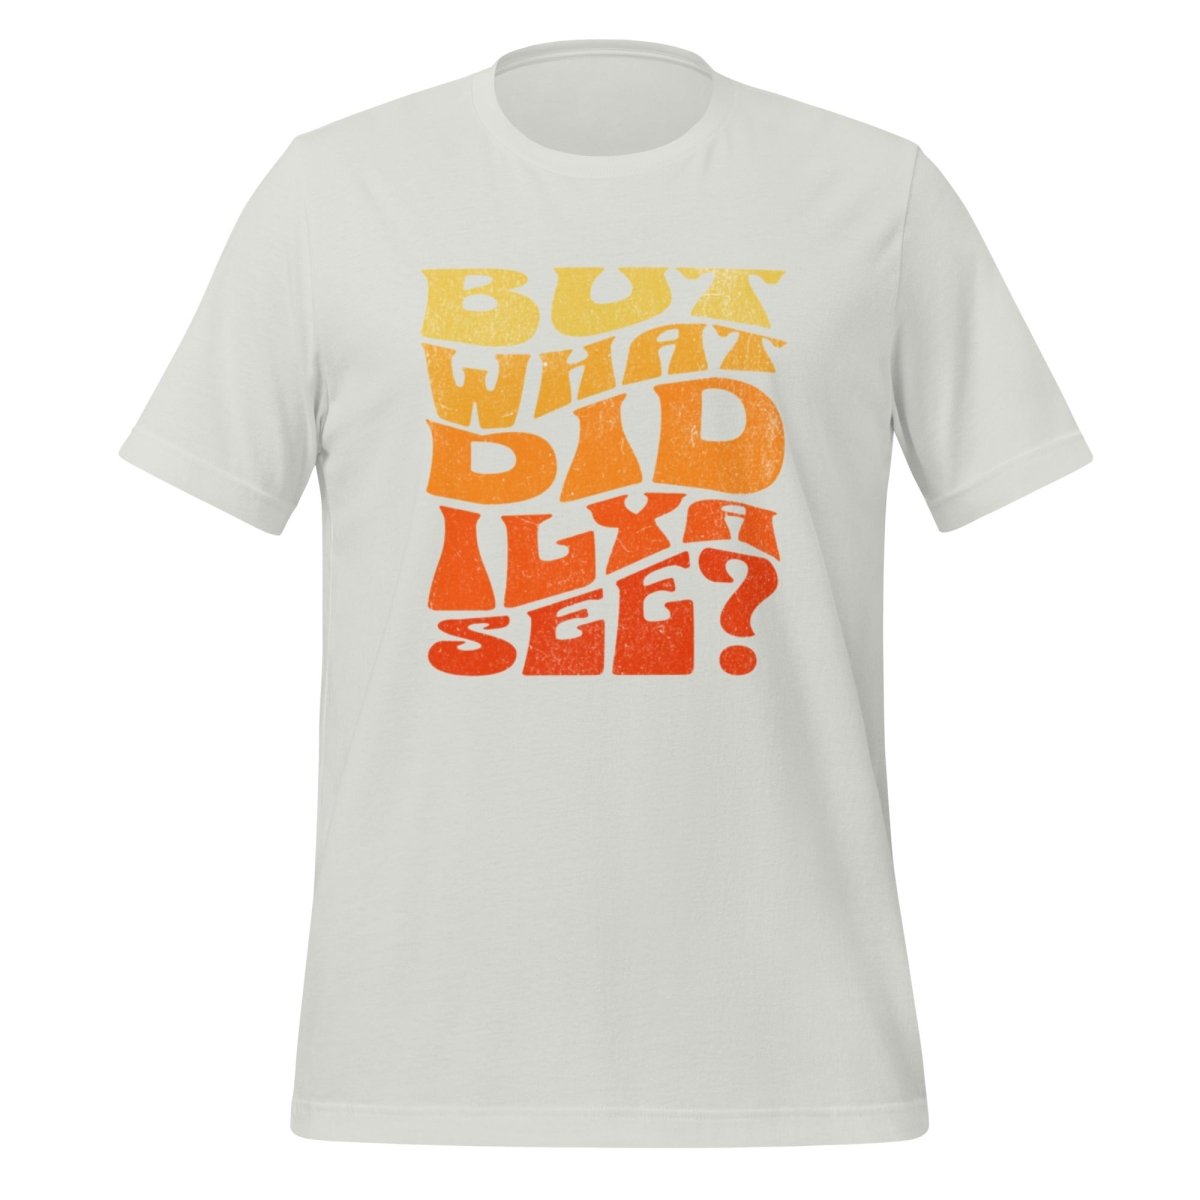 BUT WHAT DID ILYA SEE? T - Shirt (unisex) - Silver - AI Store